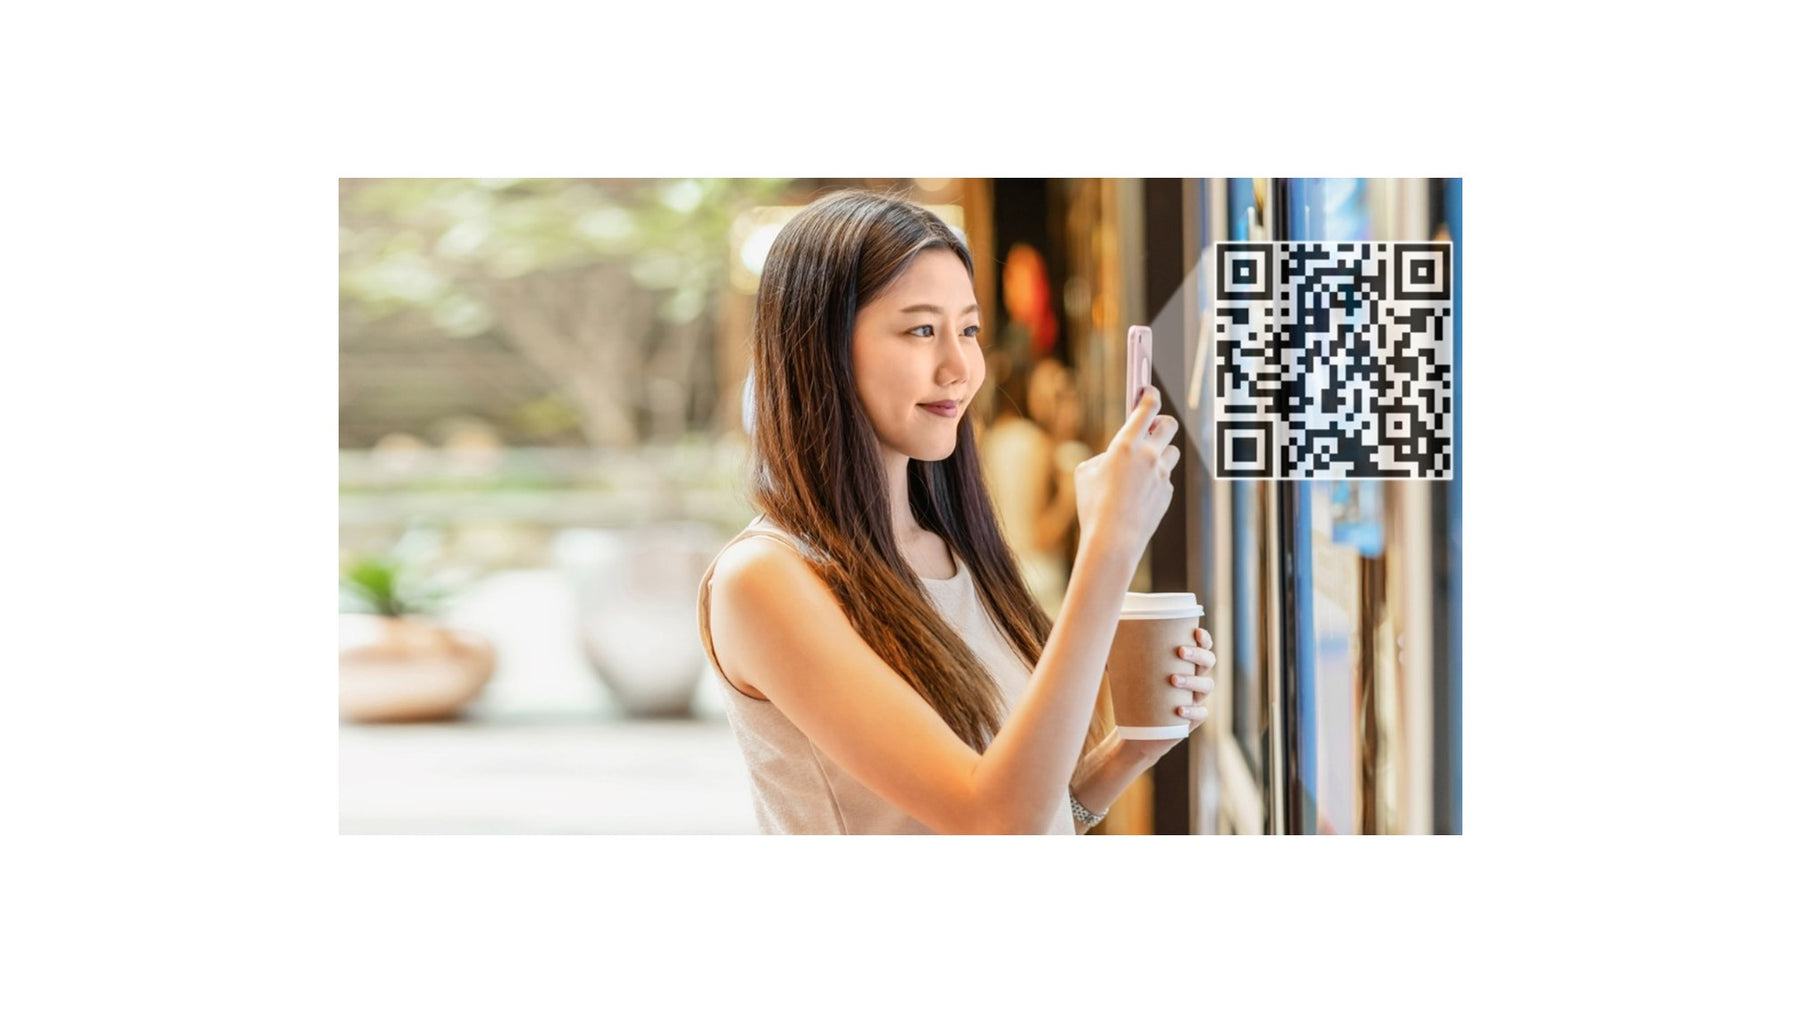 Hands-Free Barcode Scanner makes check-out payment faster